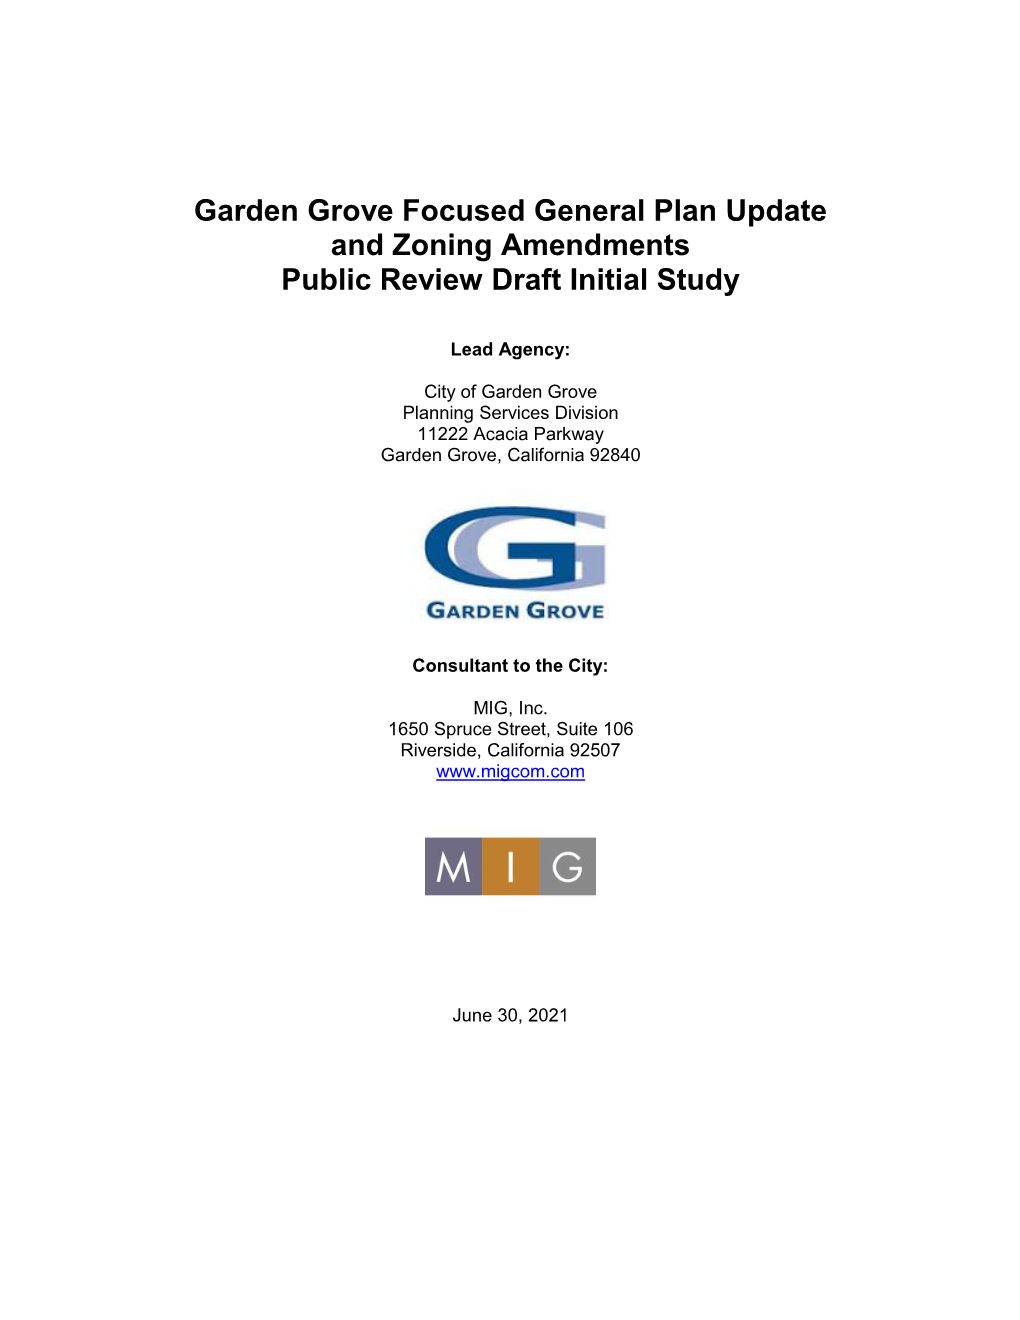 Garden Grove Focused General Plan Update and Zoning Amendments Public Review Draft Initial Study